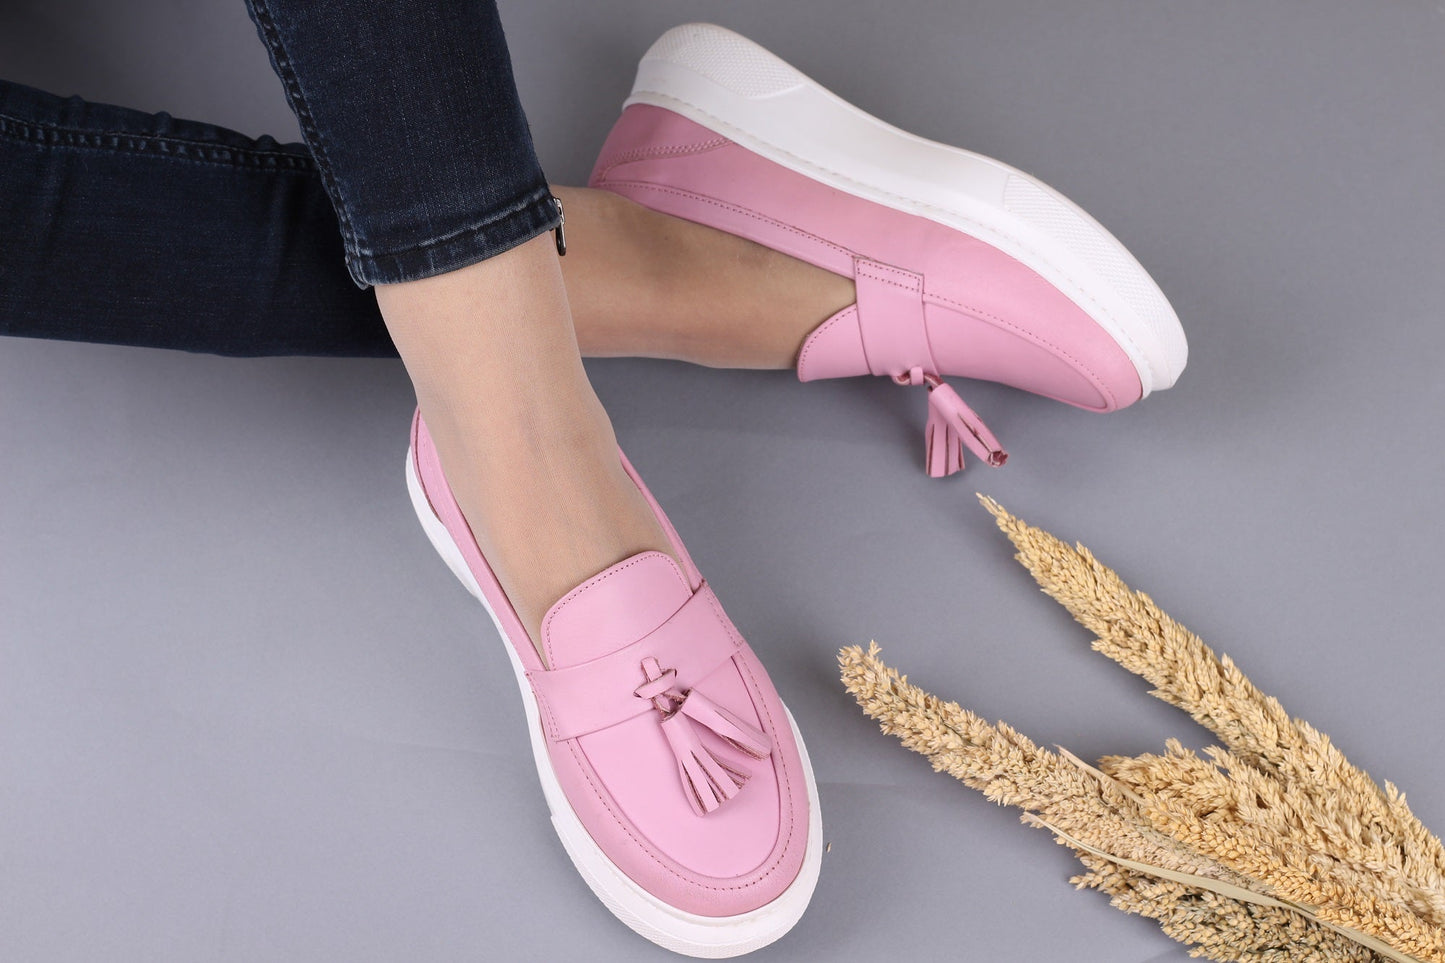 Women's genuine leather high-sole shoes in different colors